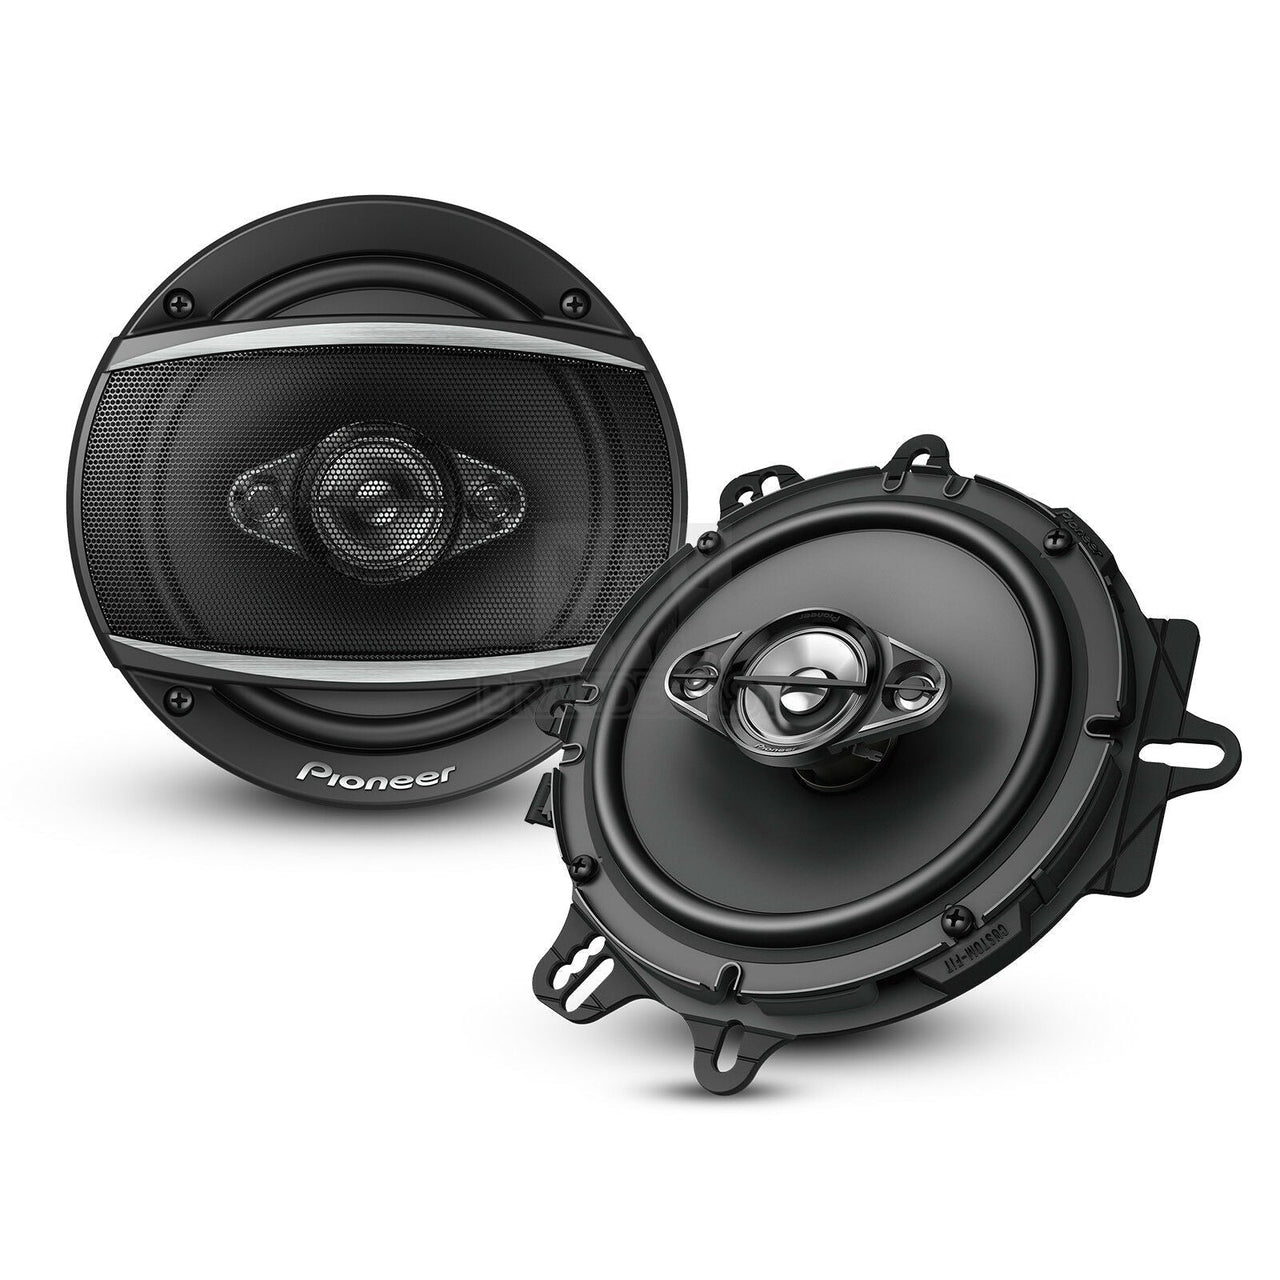 Pioneer TS-A1680F 350 W MAX 6.5" 4-WAY 4-OHM STEREO CAR AUDIO COAXIAL SPEAKERS